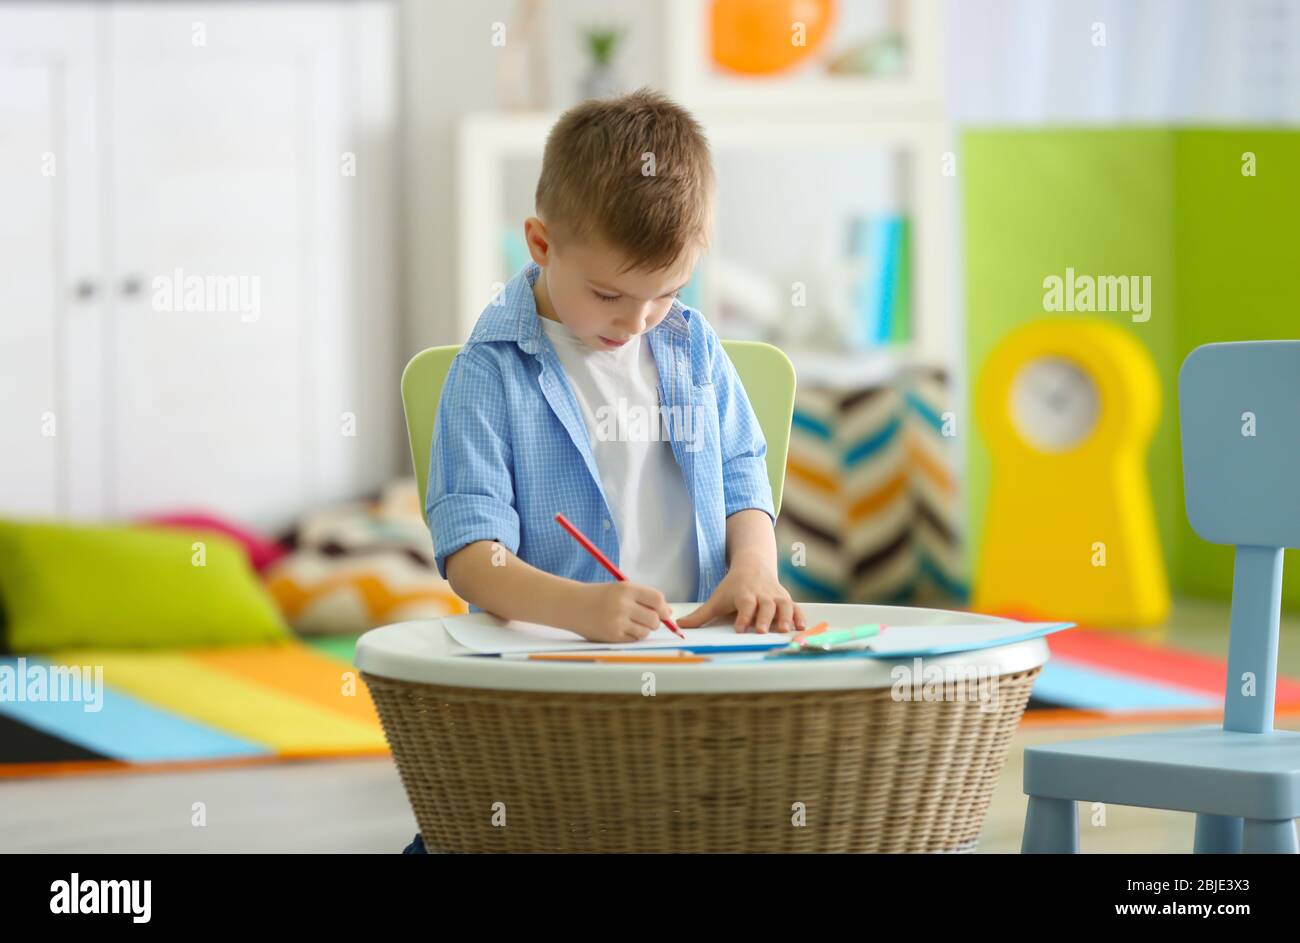 Little boy drawing picture at child psychologist's office Stock Photo